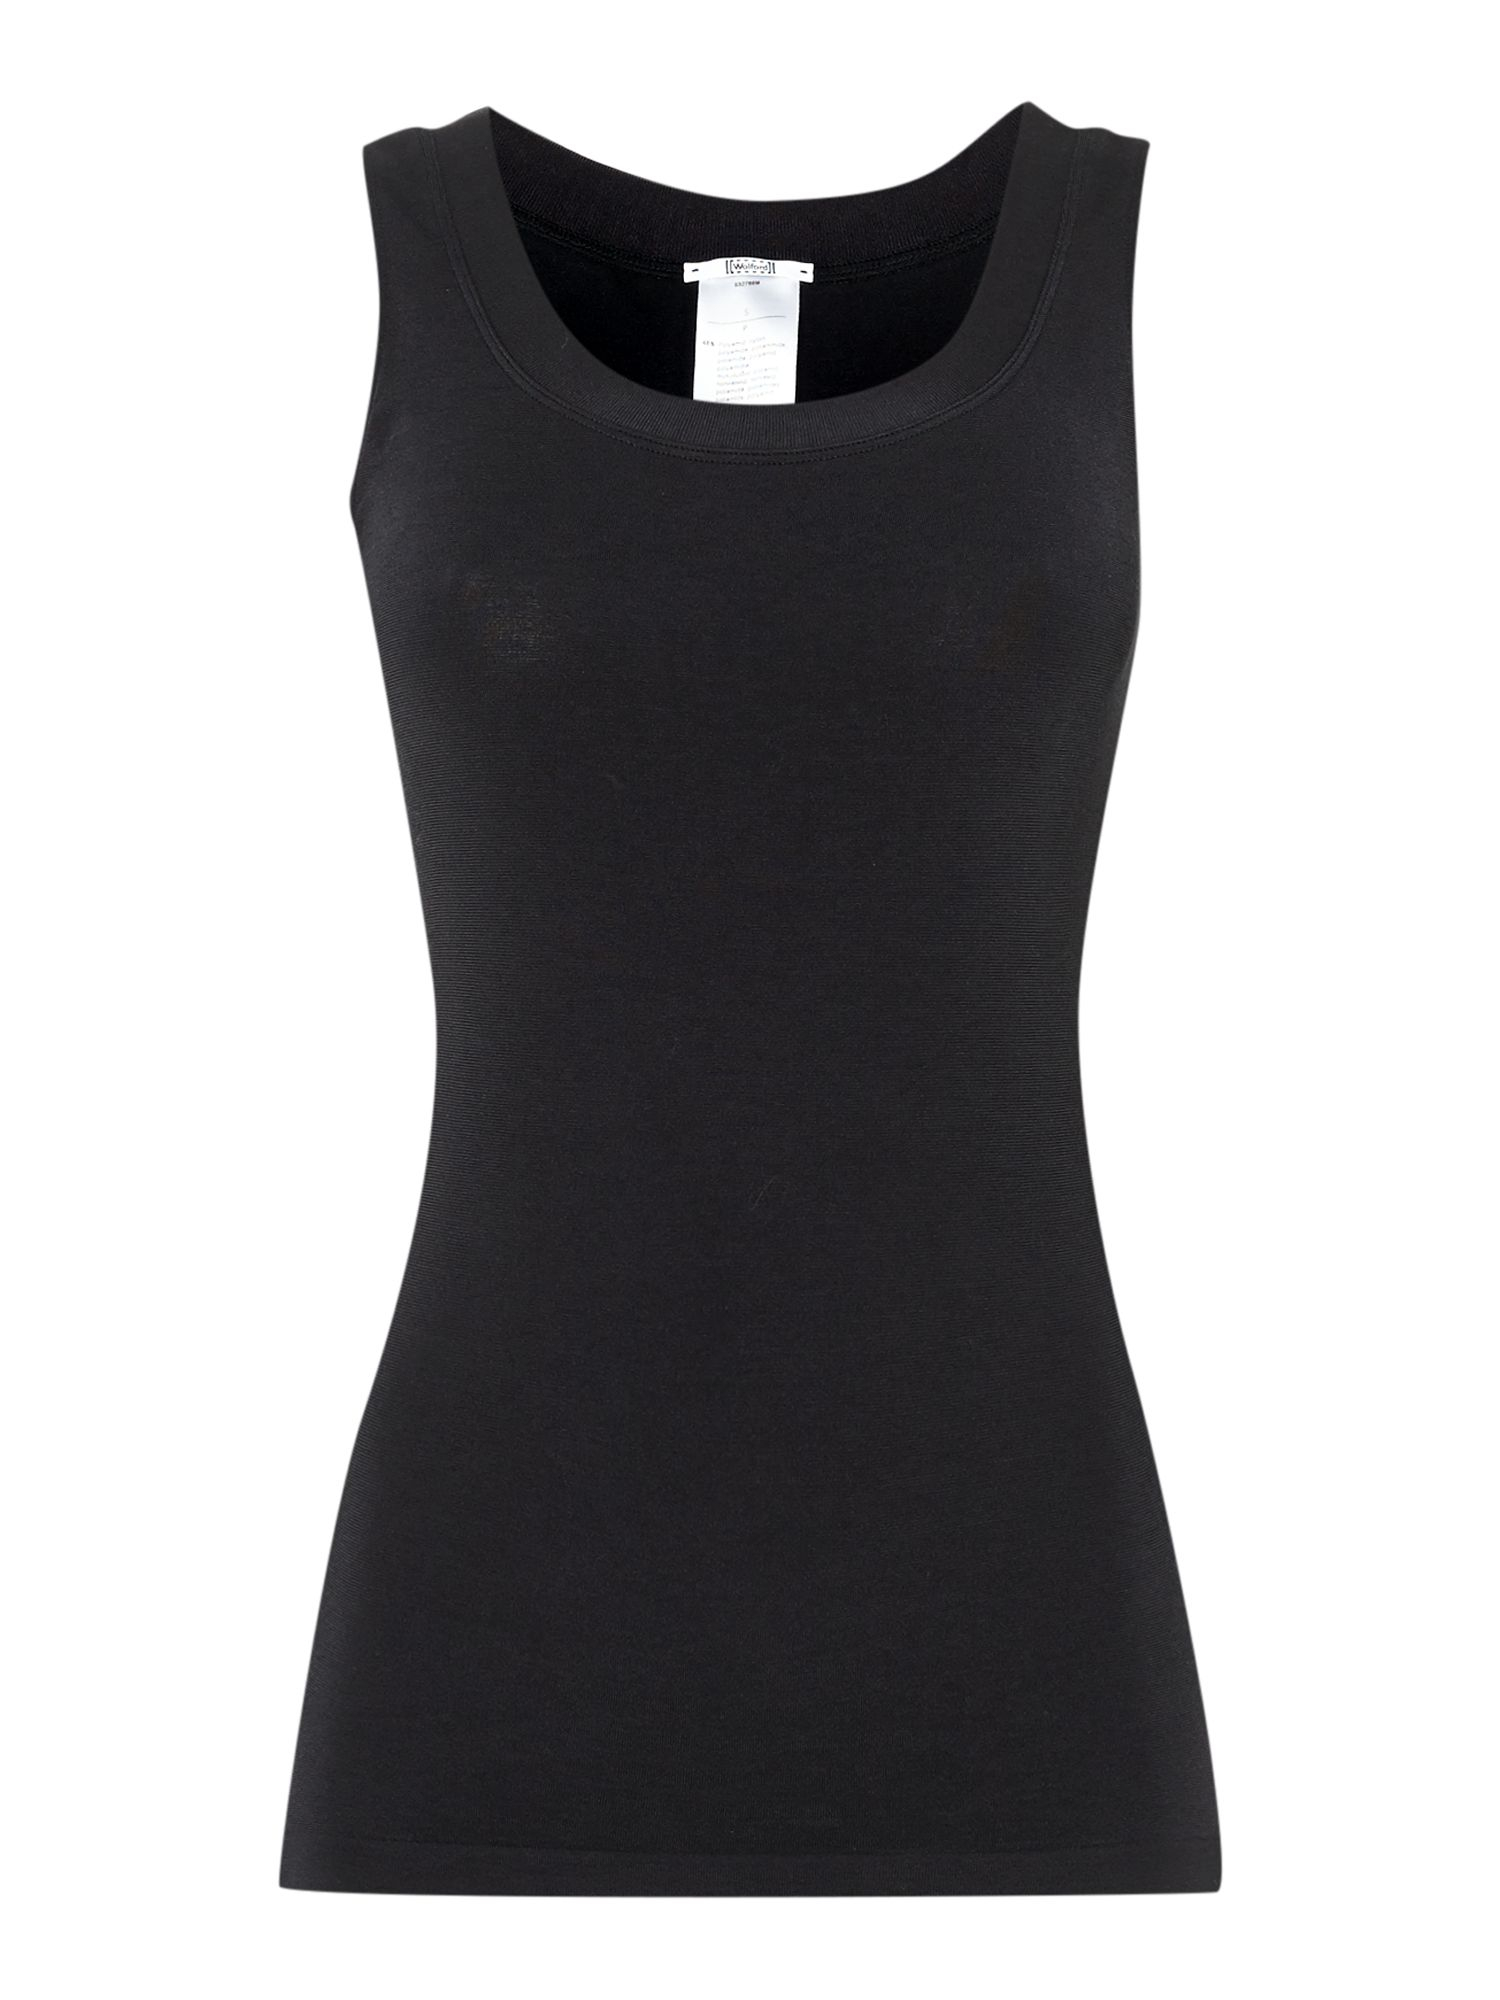 Wolford Cotton Athens Top in Ecru (Black) - Lyst